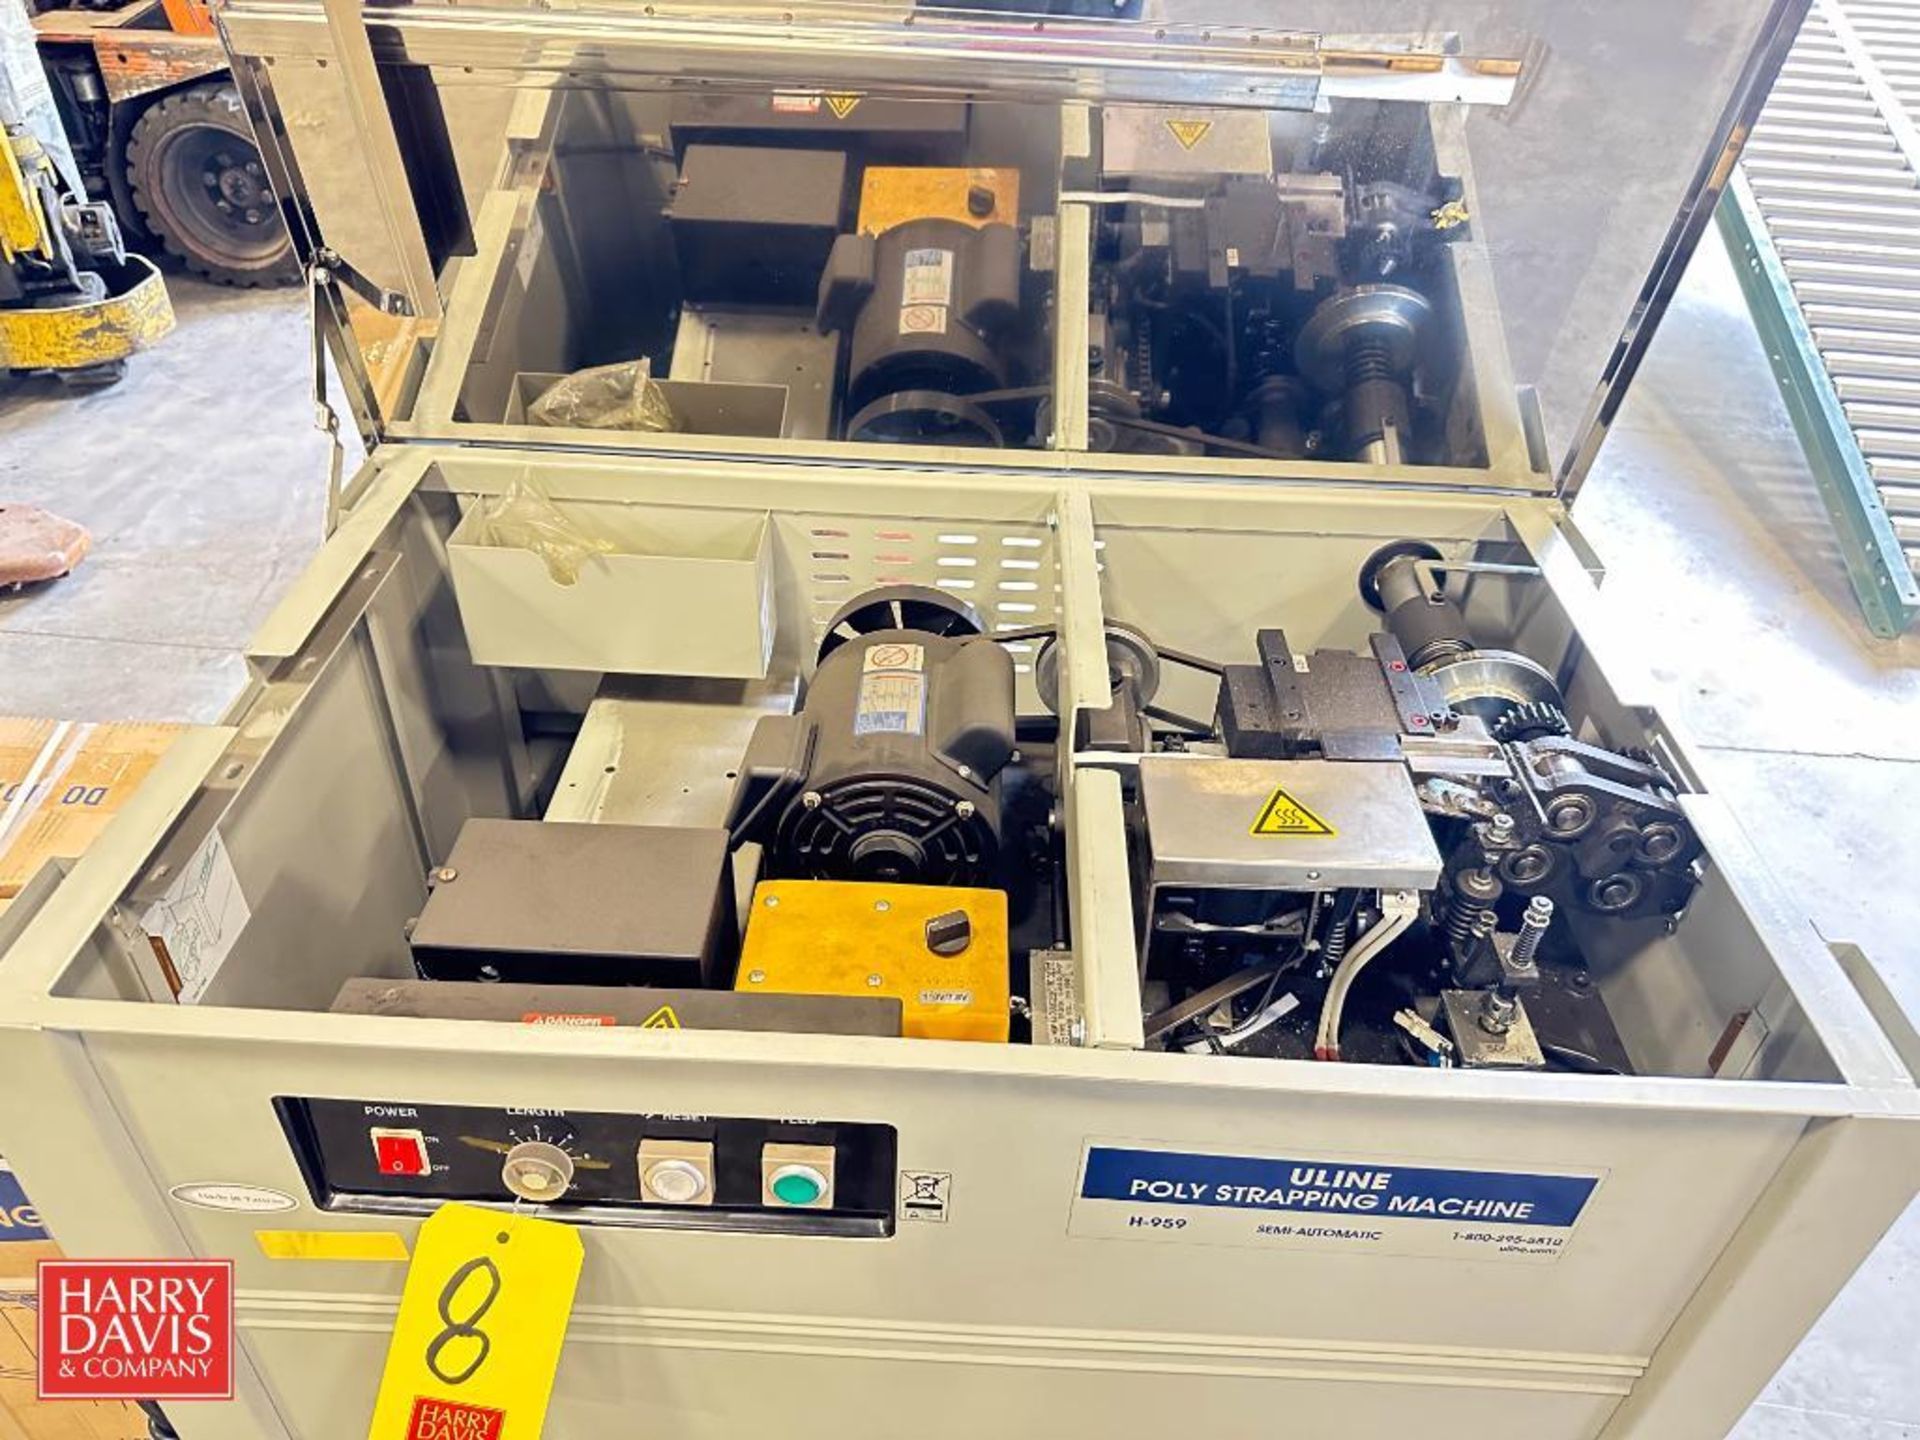 ULINE Poly Strapping Machine, Model: H-959 with (2) Cartons Shaping - Rigging Fee: $100 - Image 2 of 3